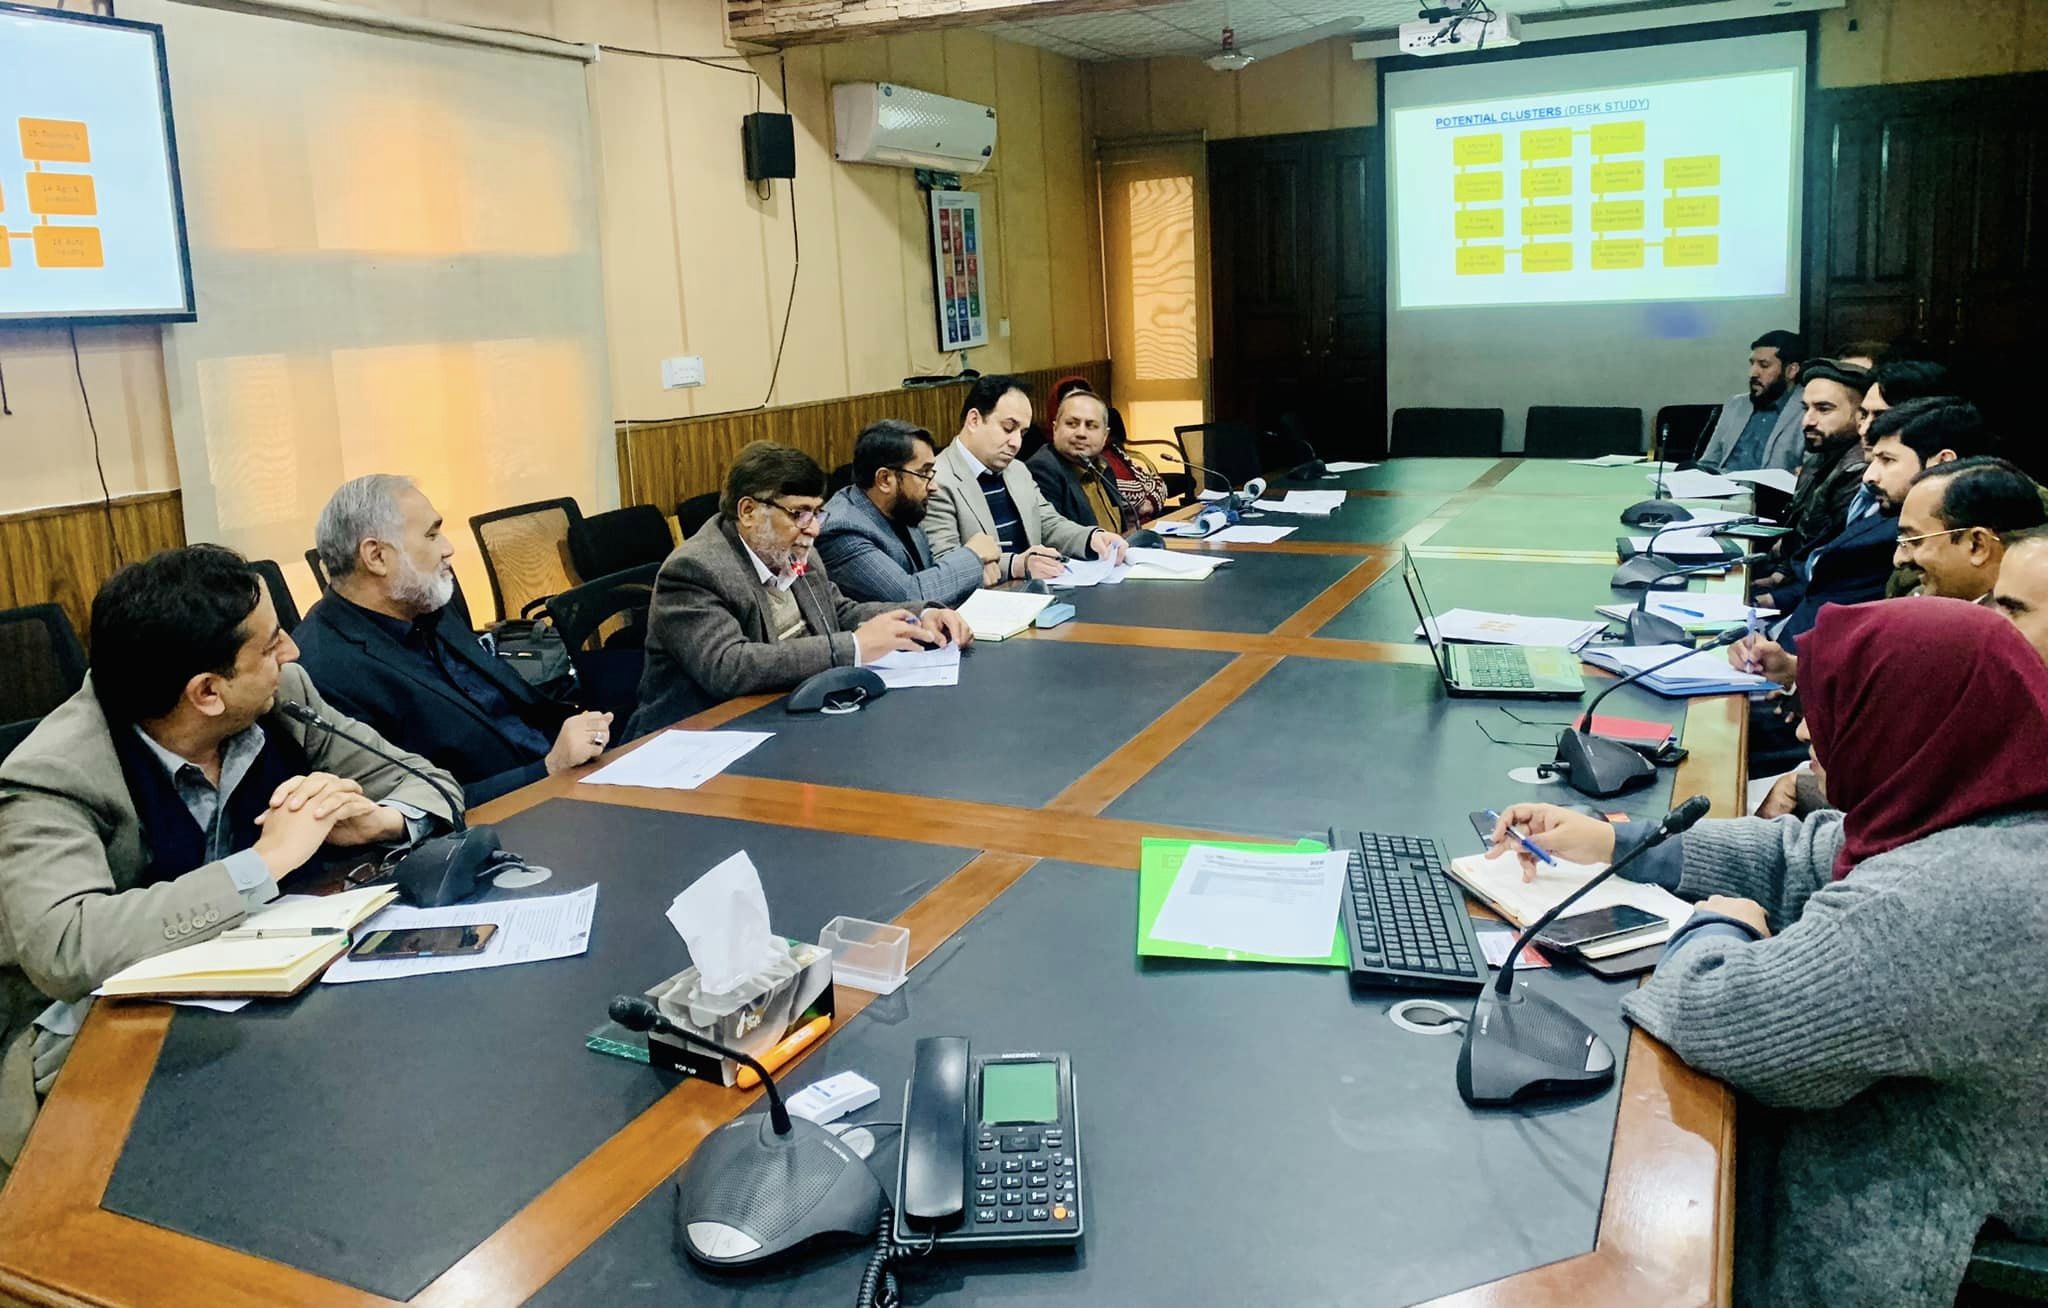 Consultative session on analysis of baseline industries and identification of investment opportunities in Greater Western Peshawar